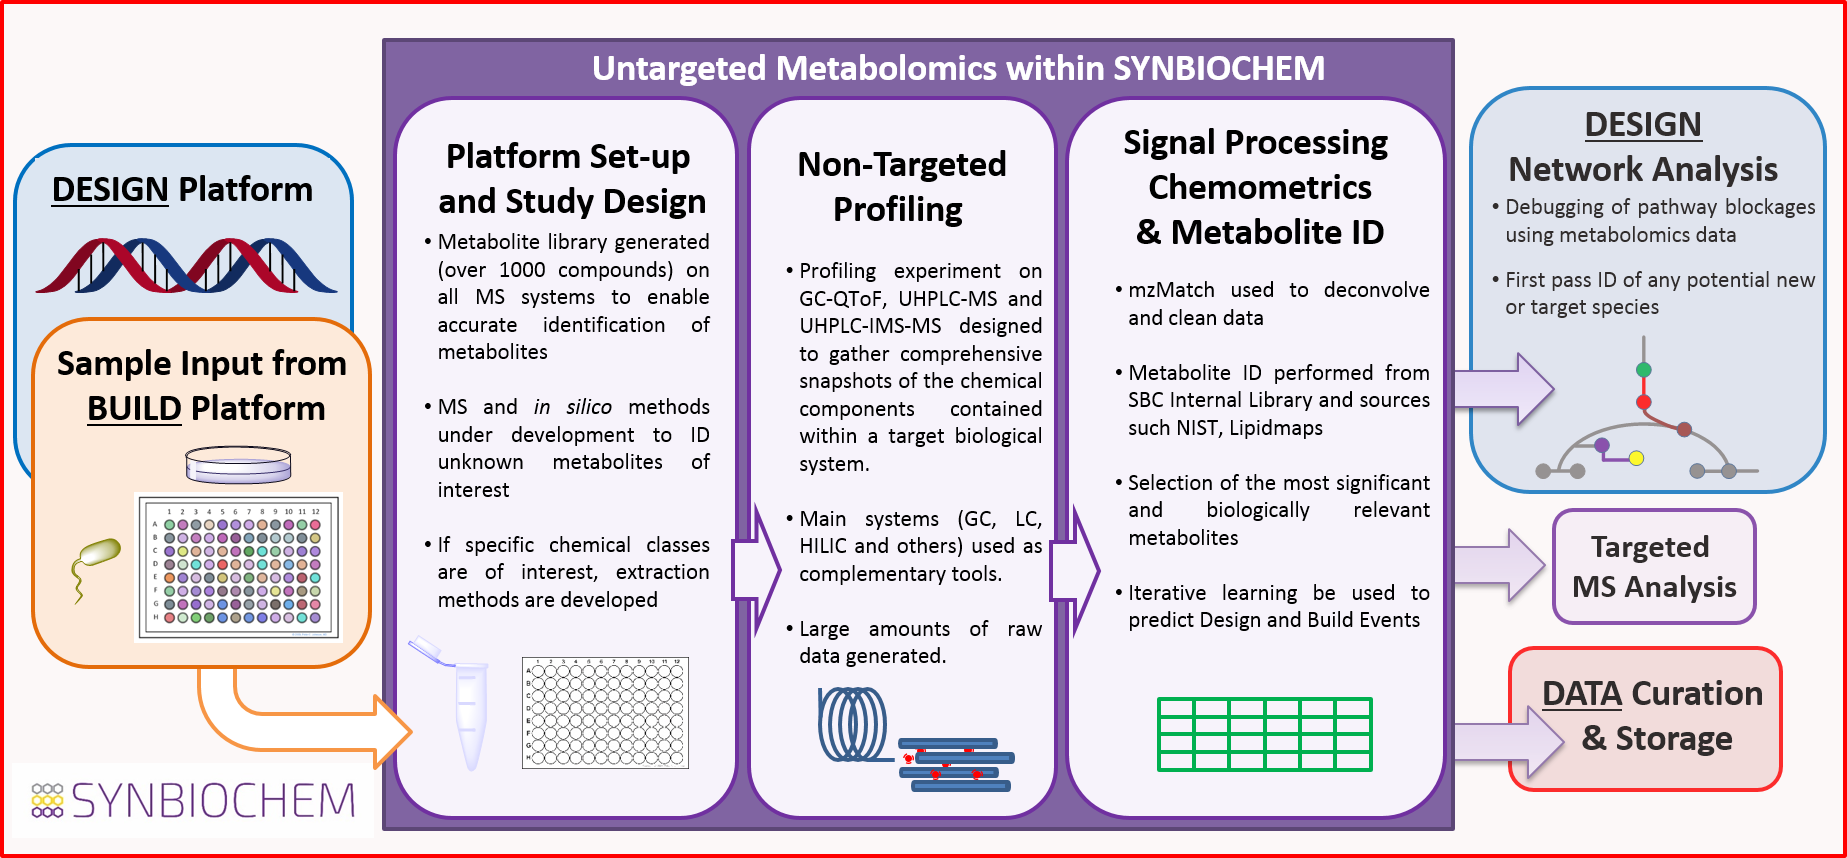 Targeted metabolomics. Targeted approaches can be used to 